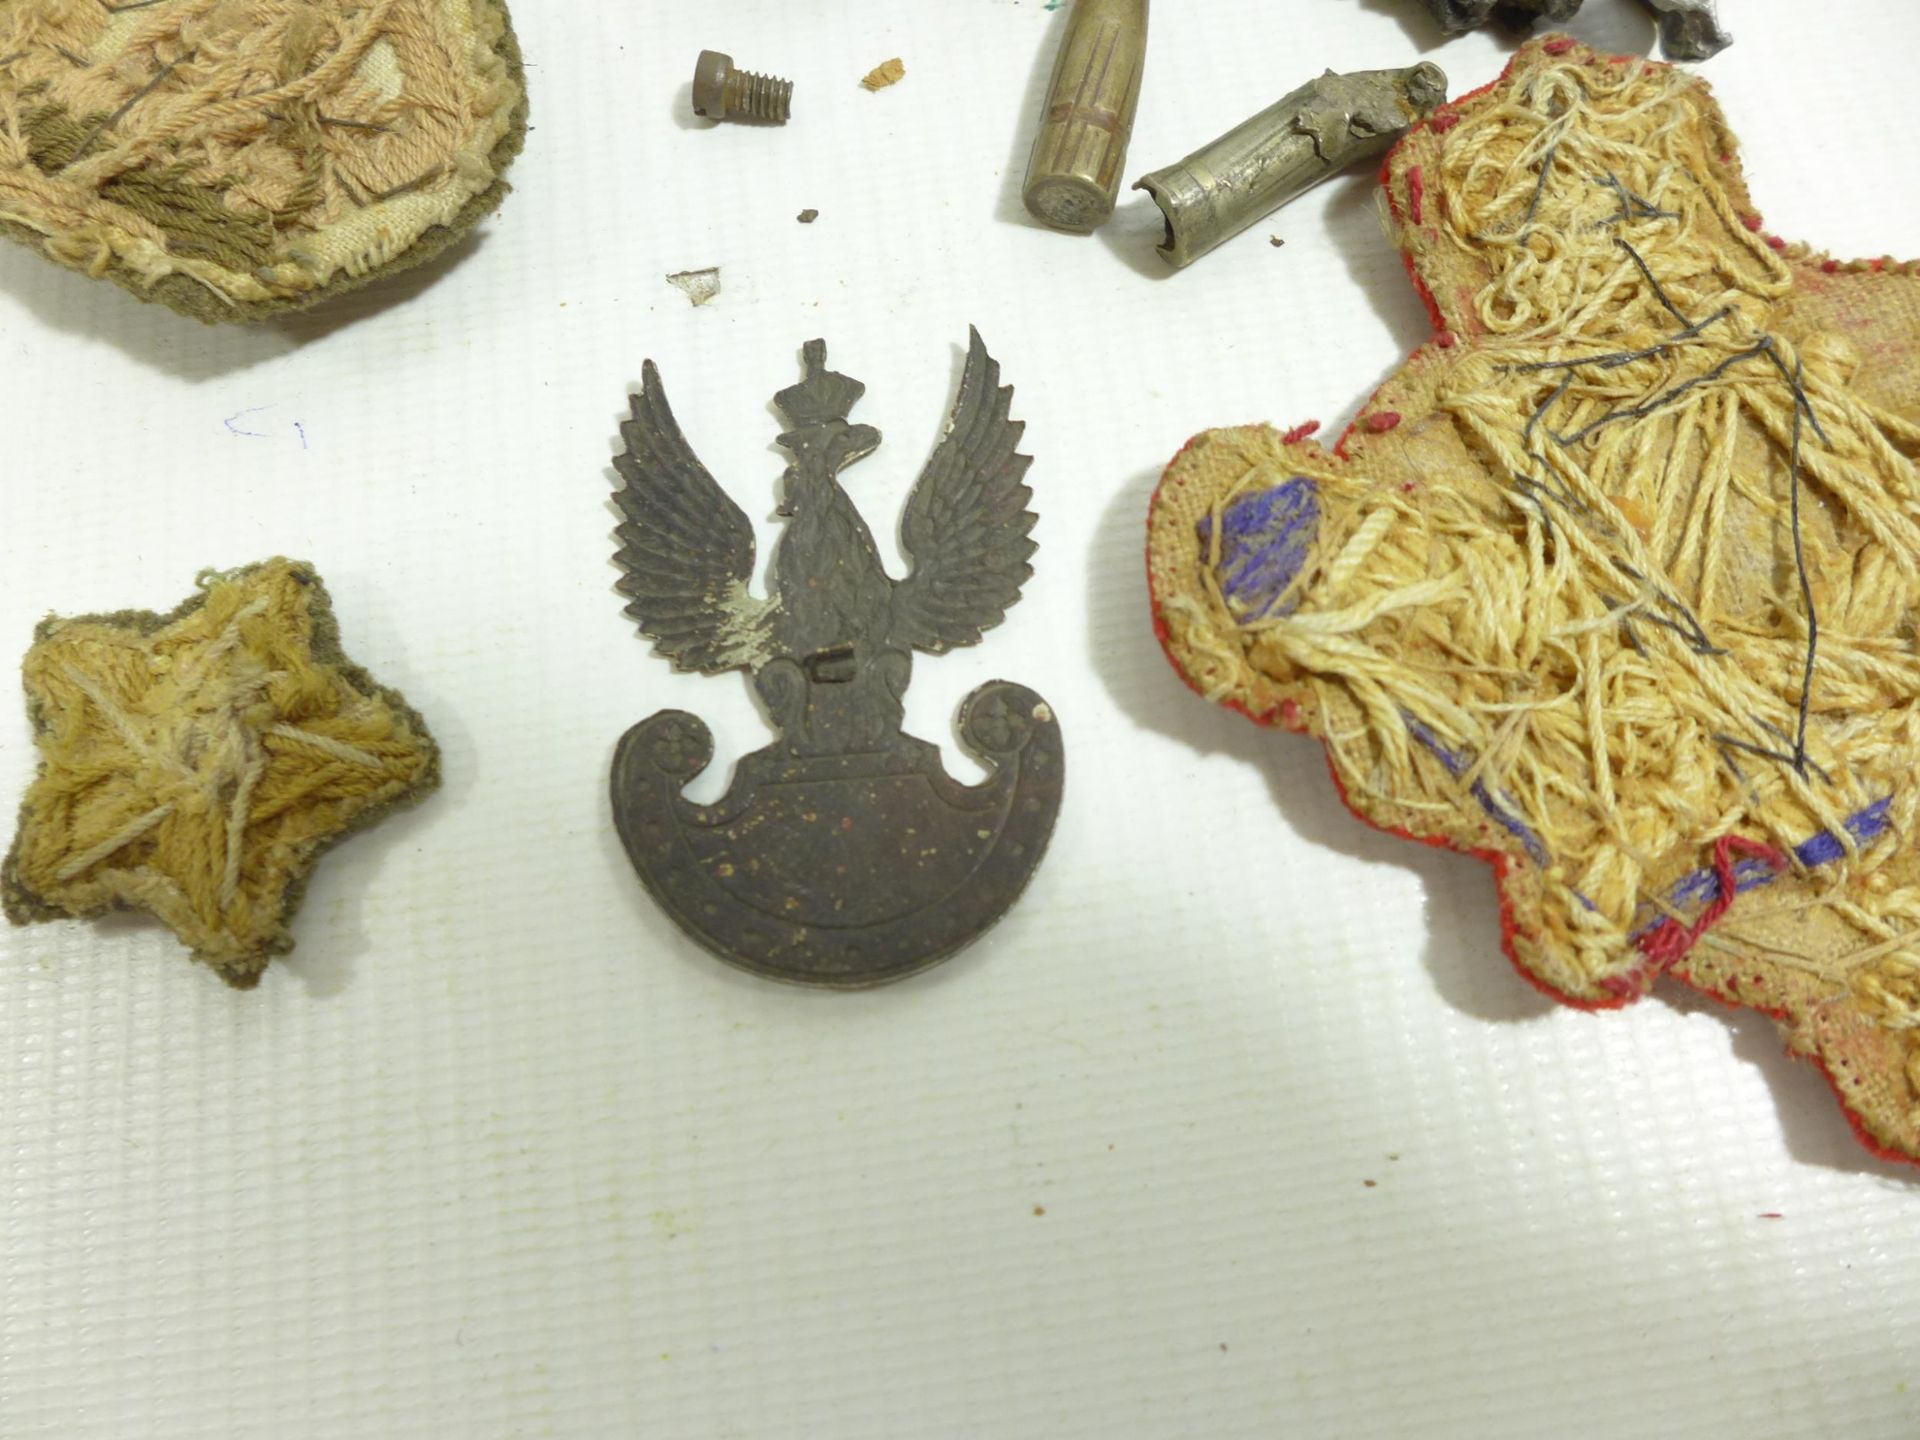 A BOER WAR PERIOD BOX CONTAINING NUMEROUS WORLD WAR I AND WORLD WAR II BADGES TO INCLUDE POLISH ARMY - Image 7 of 8